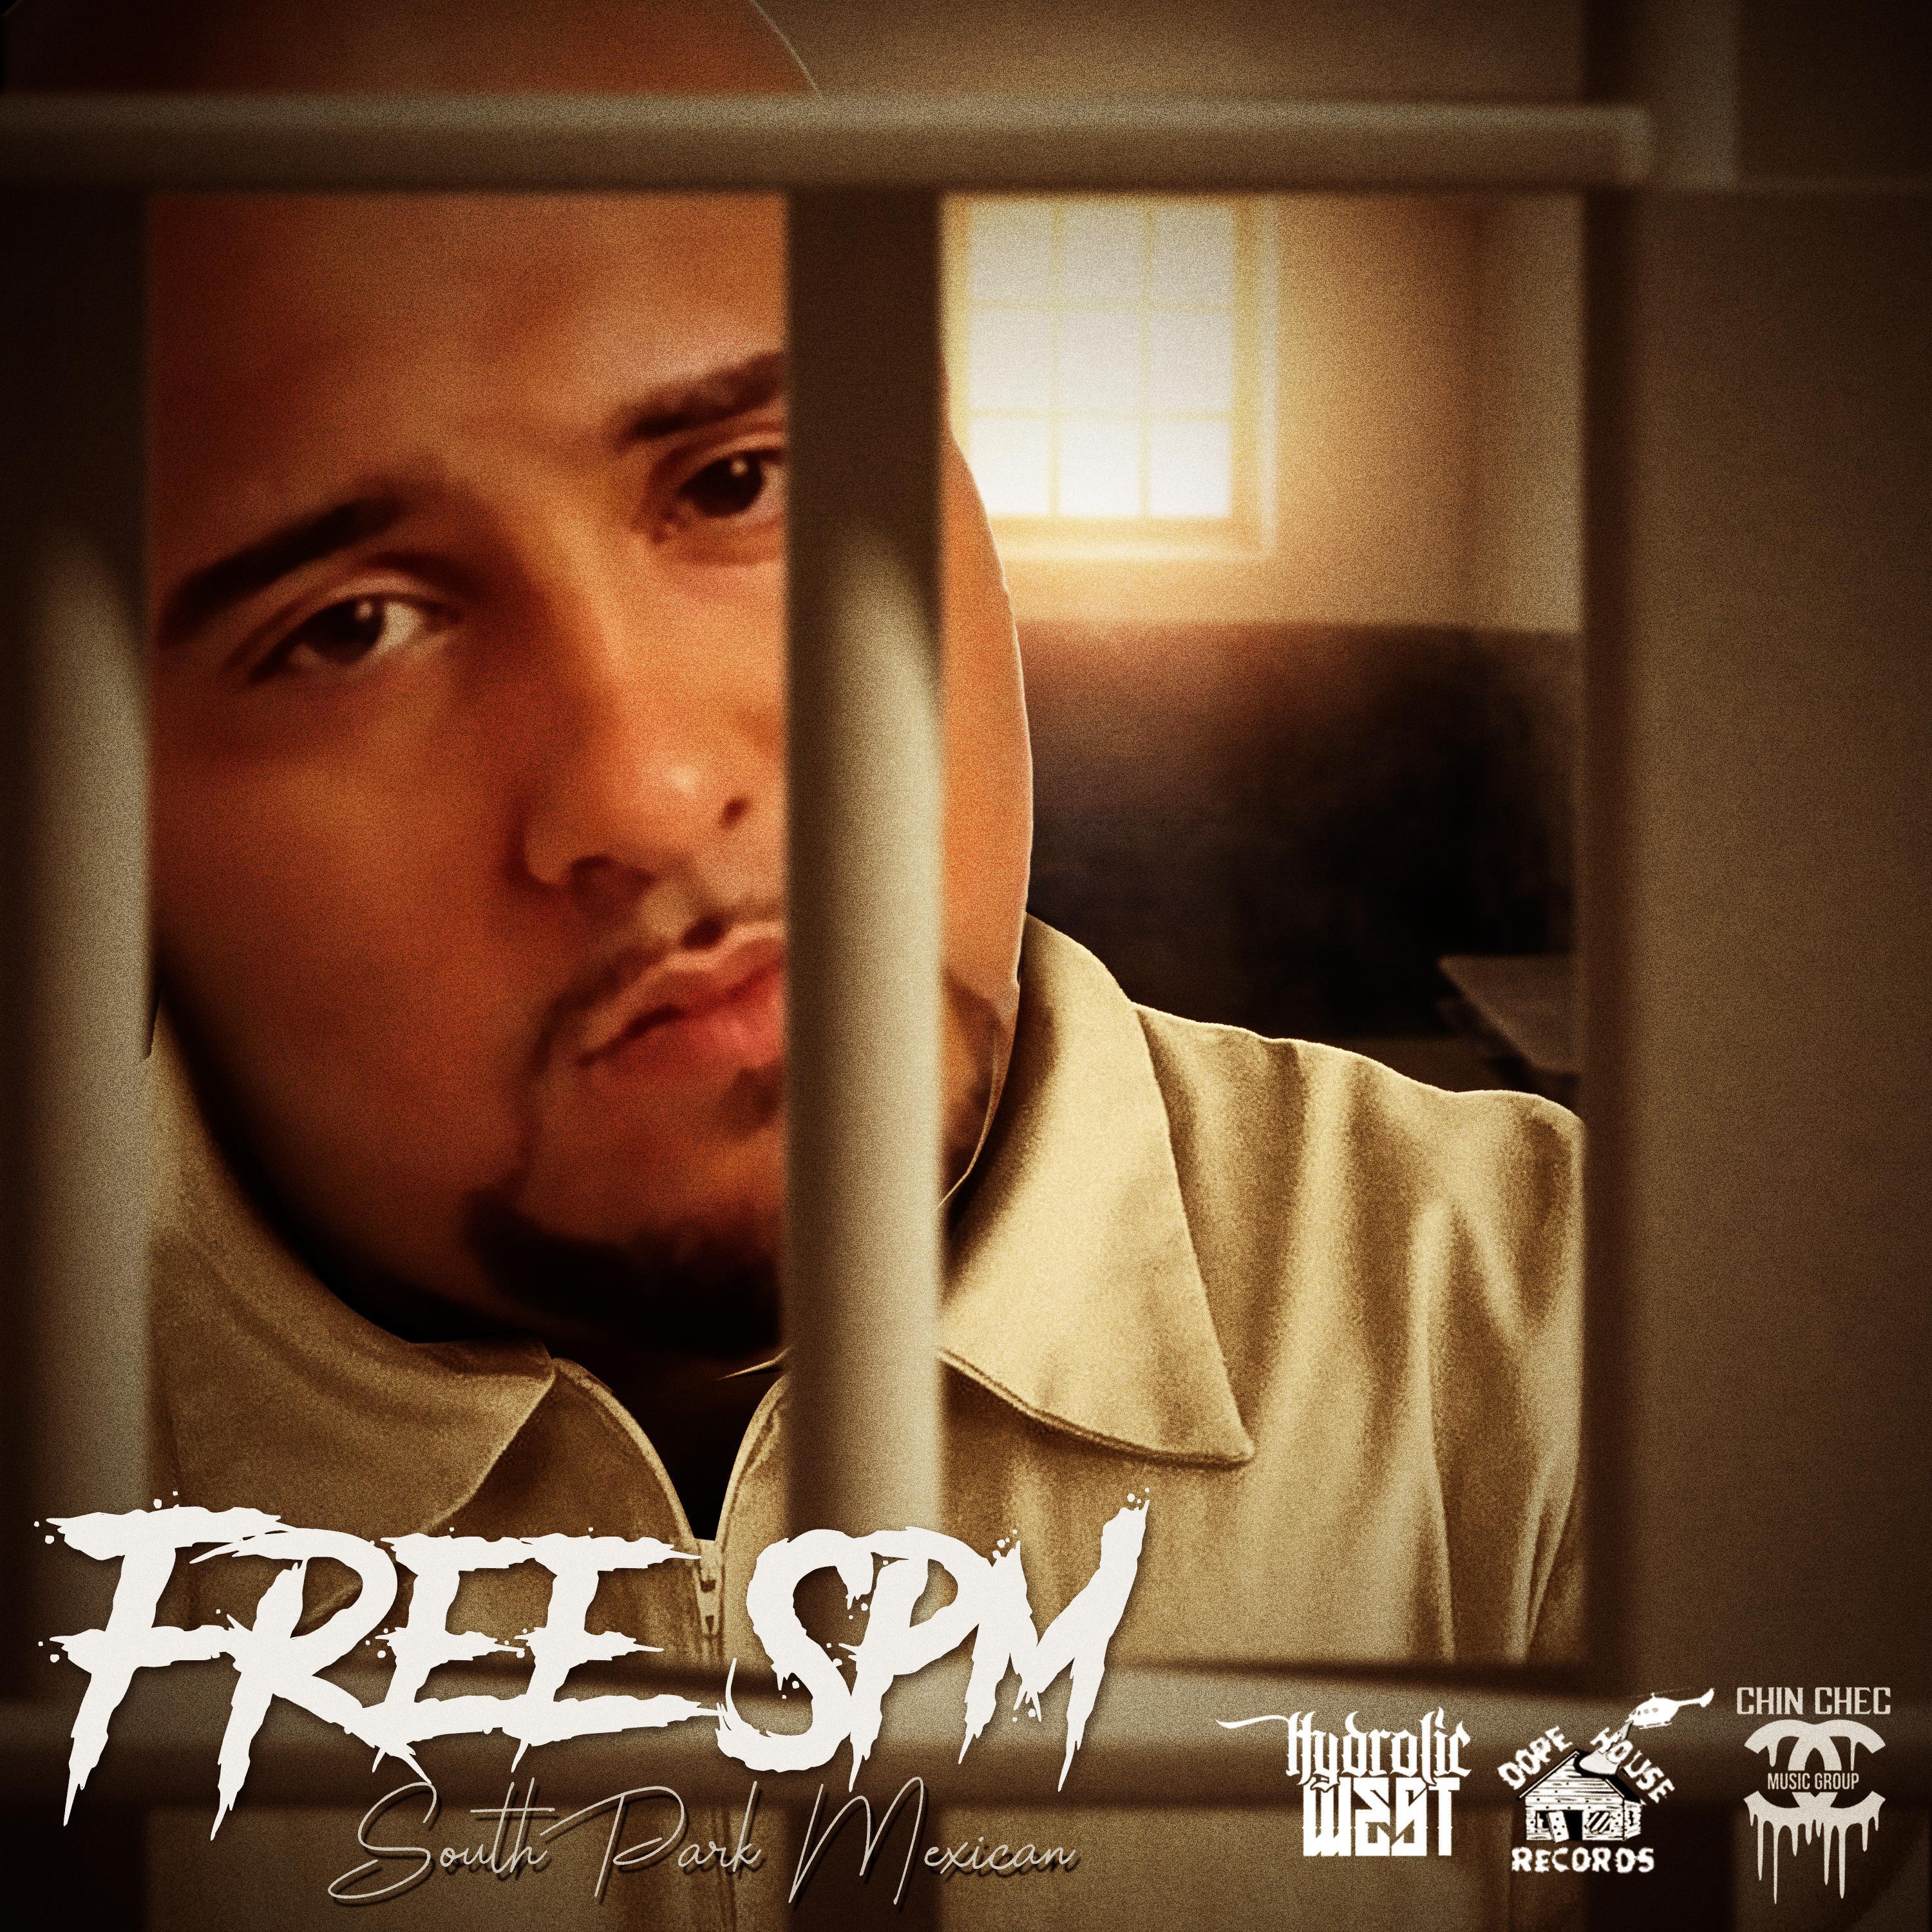 Free 5pm (South Park Mexican)